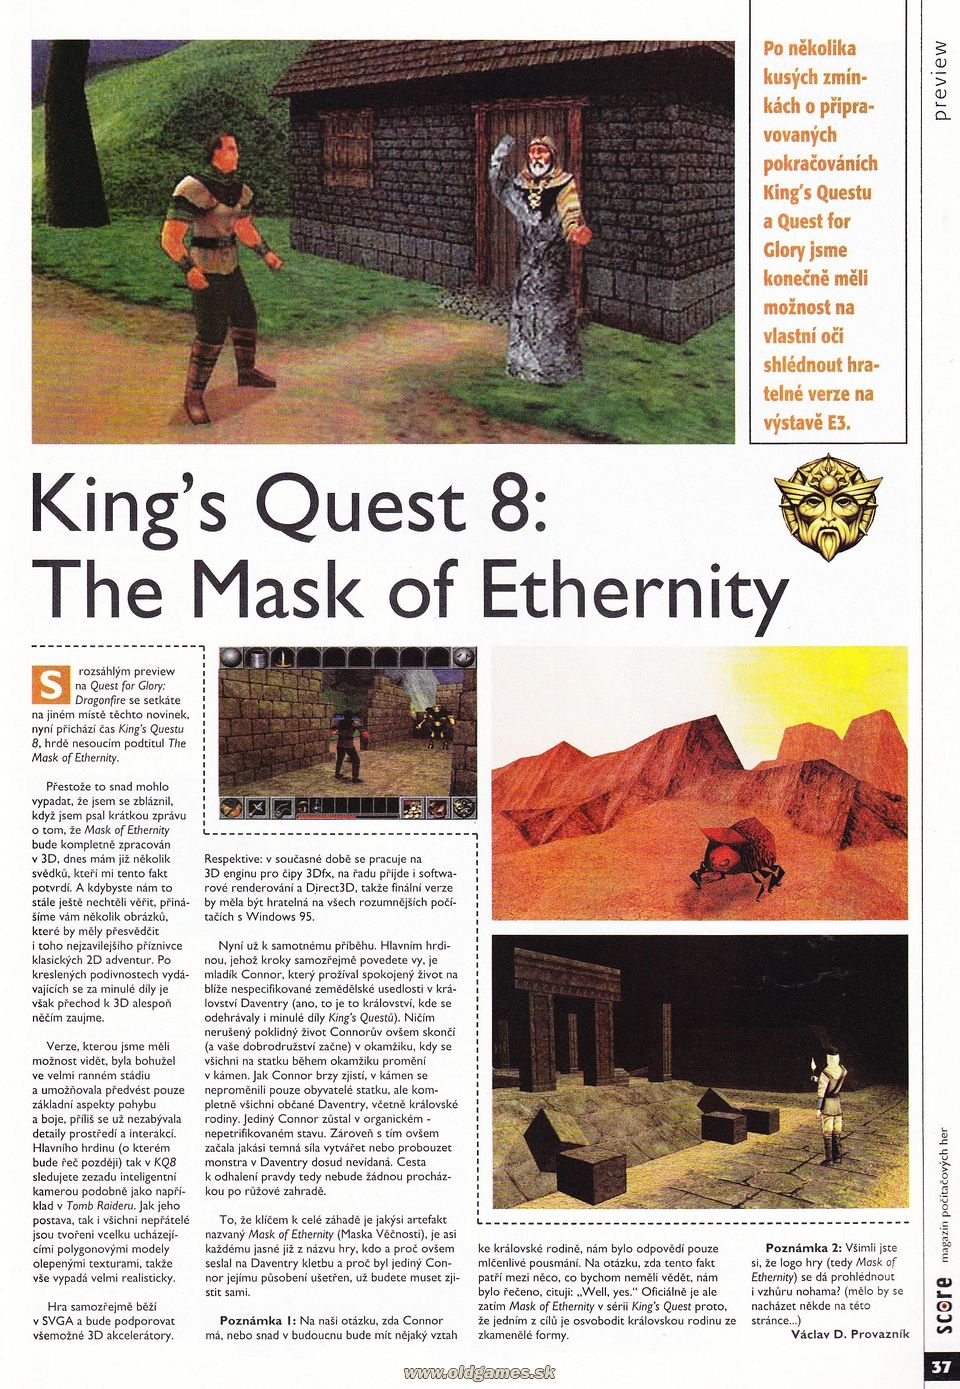 Preview: King's Quest 8: The Mask of Eternity